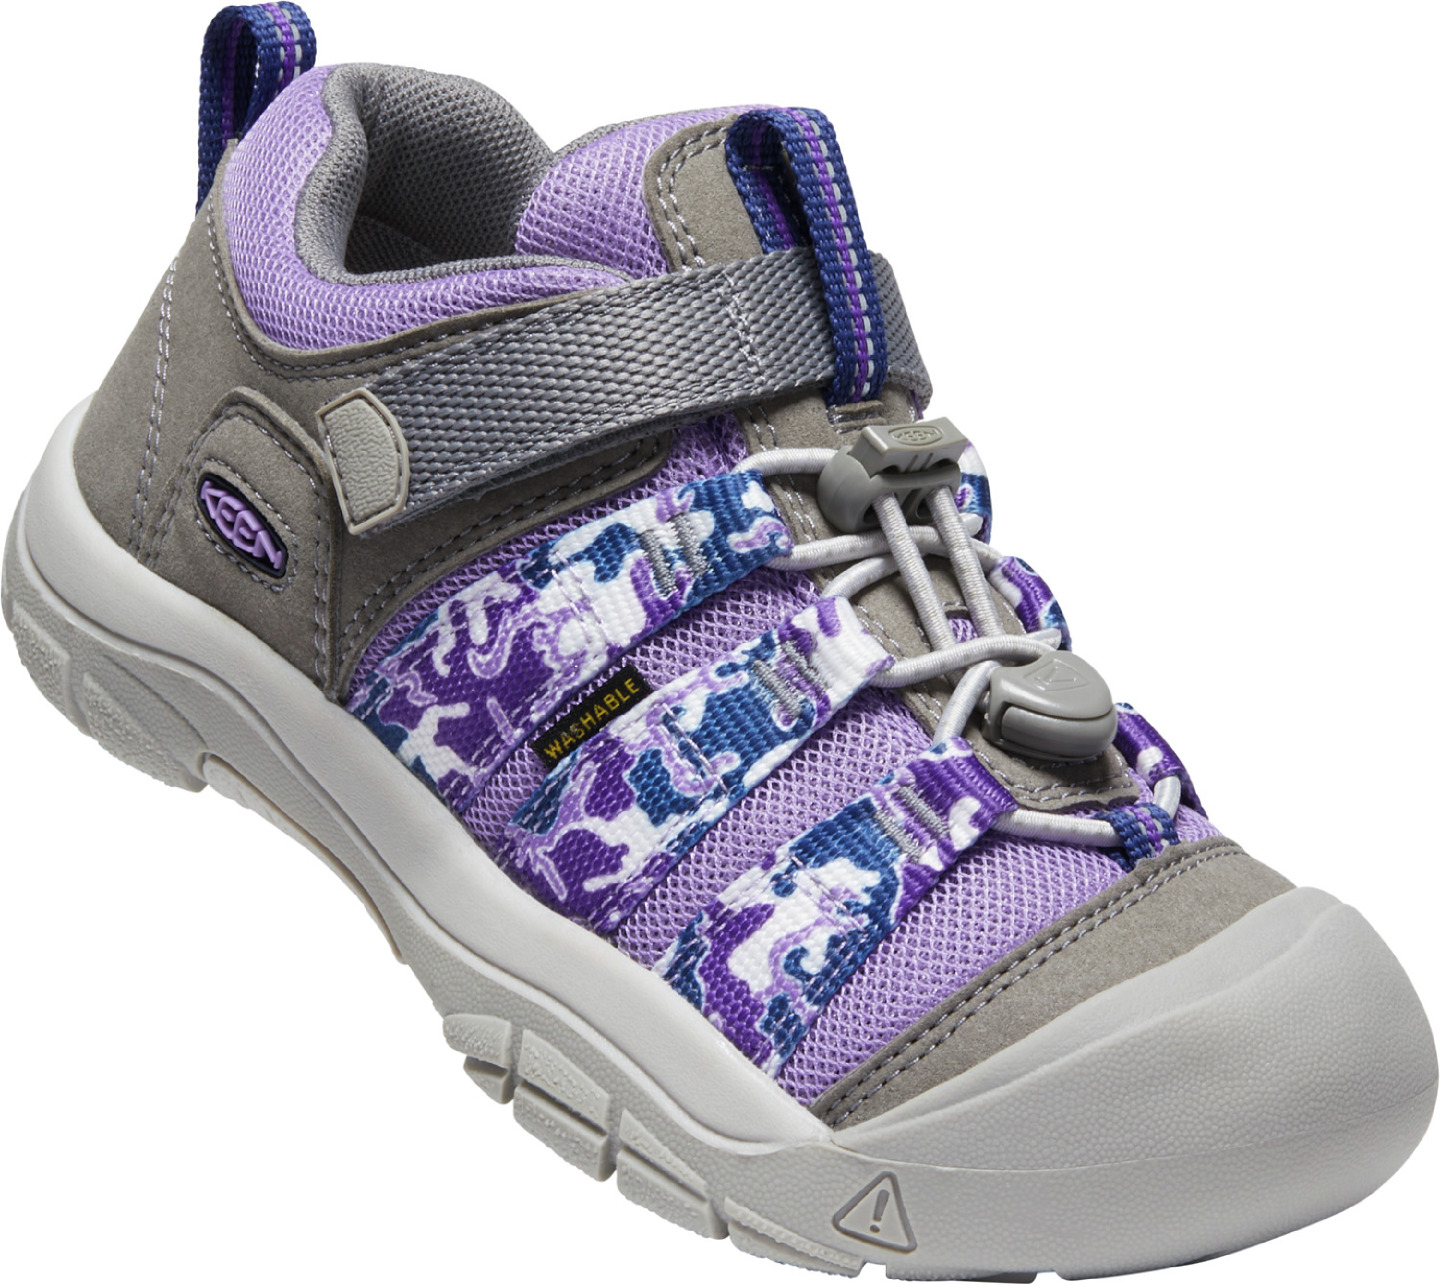 Boty Keen NEWPORT H2SHO YOUTH chalk violet/drizzle US 3